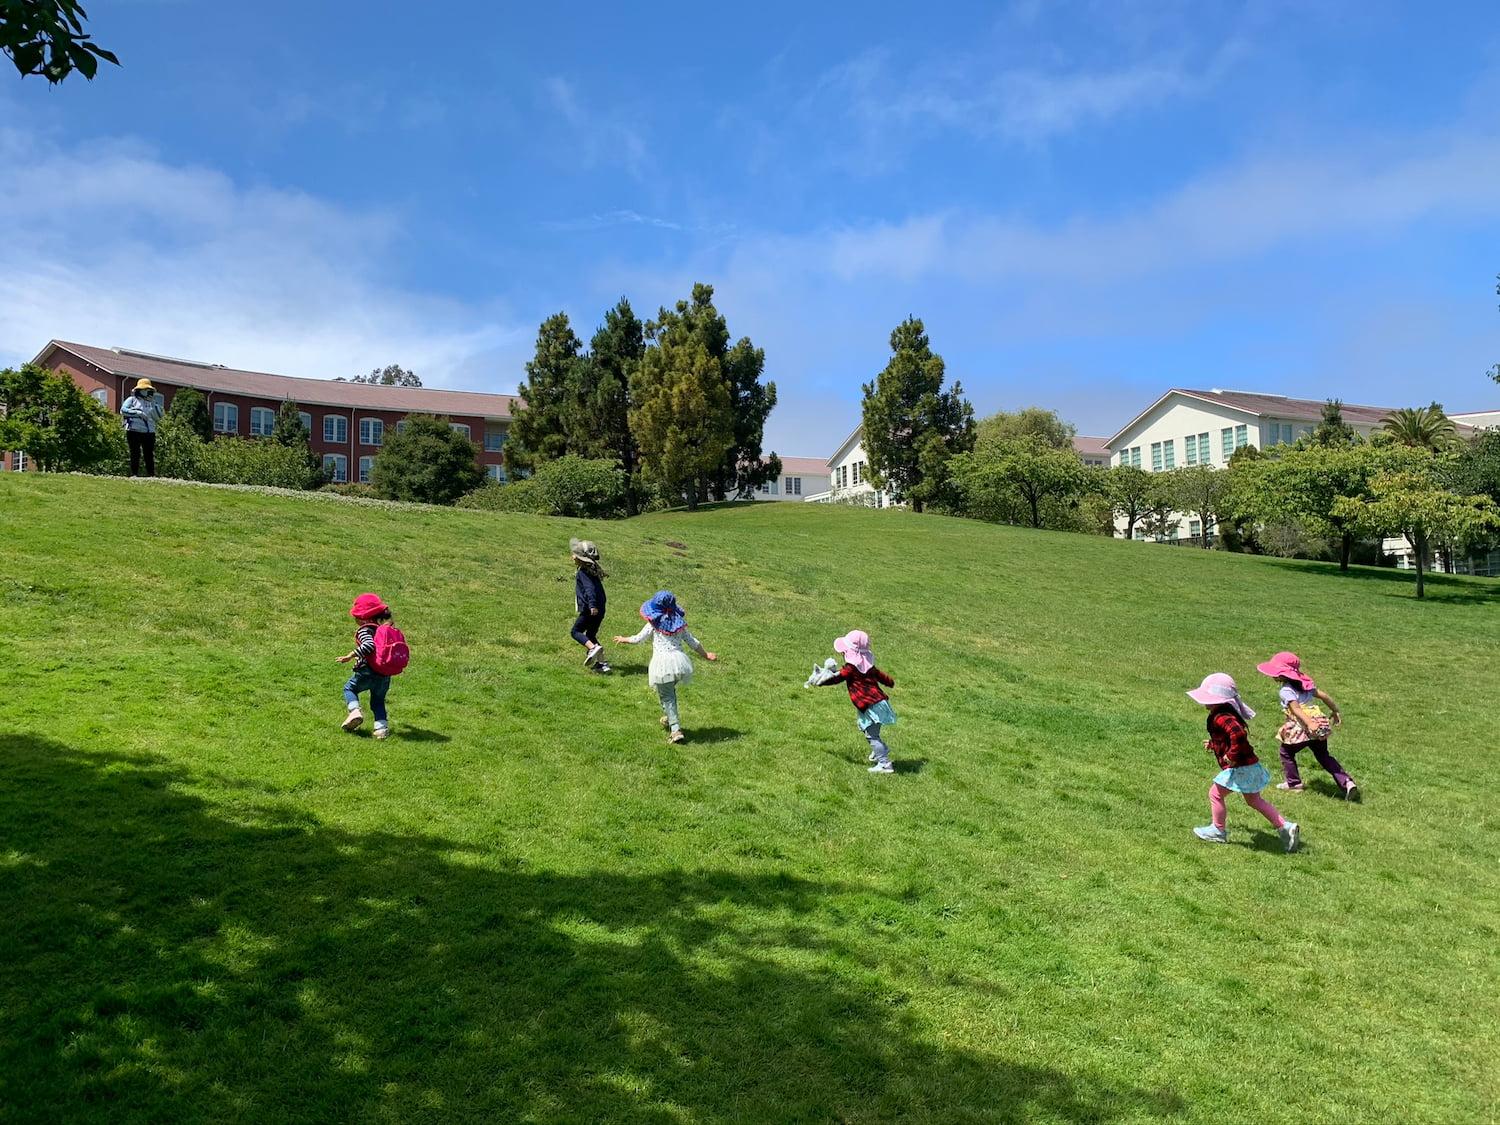 Children playing on the public lawn at the Letterman Digital Arts Center.